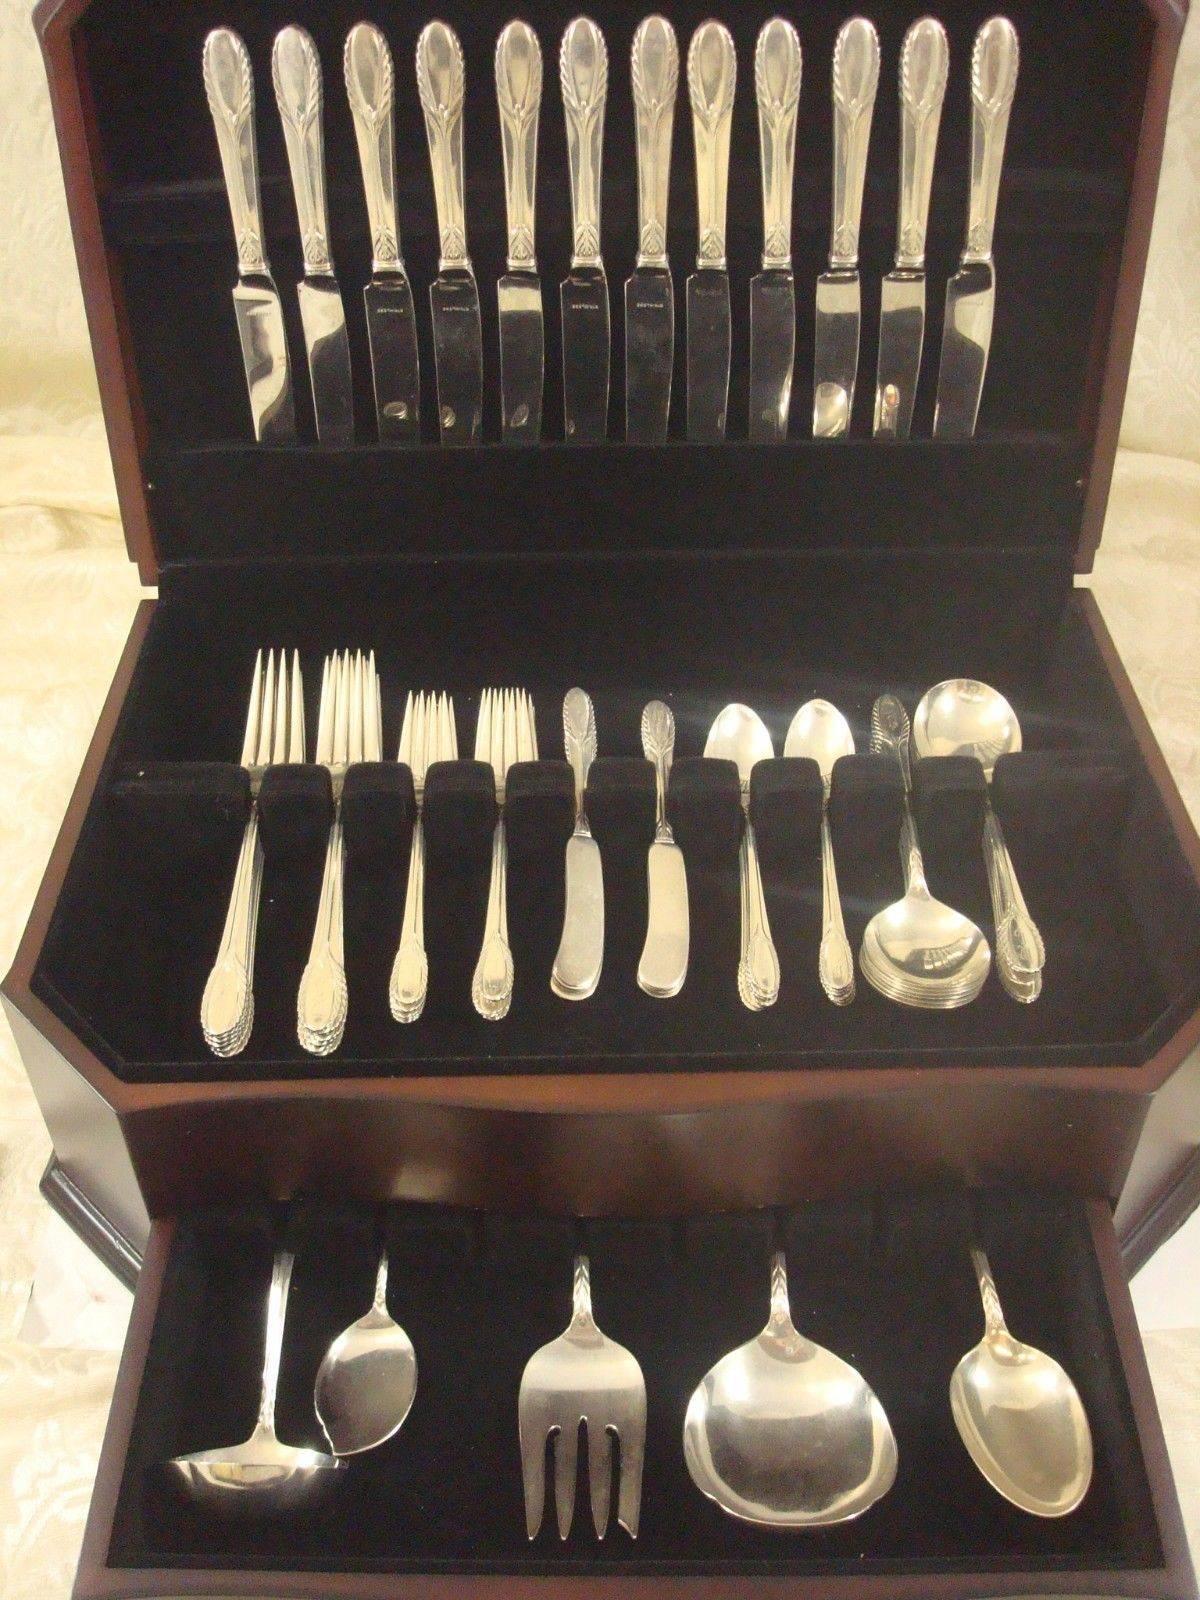 Trousseau by International sterling silver flatware set dinner size of 77 pieces. This set includes:

12 dinner knives, 9 1/2